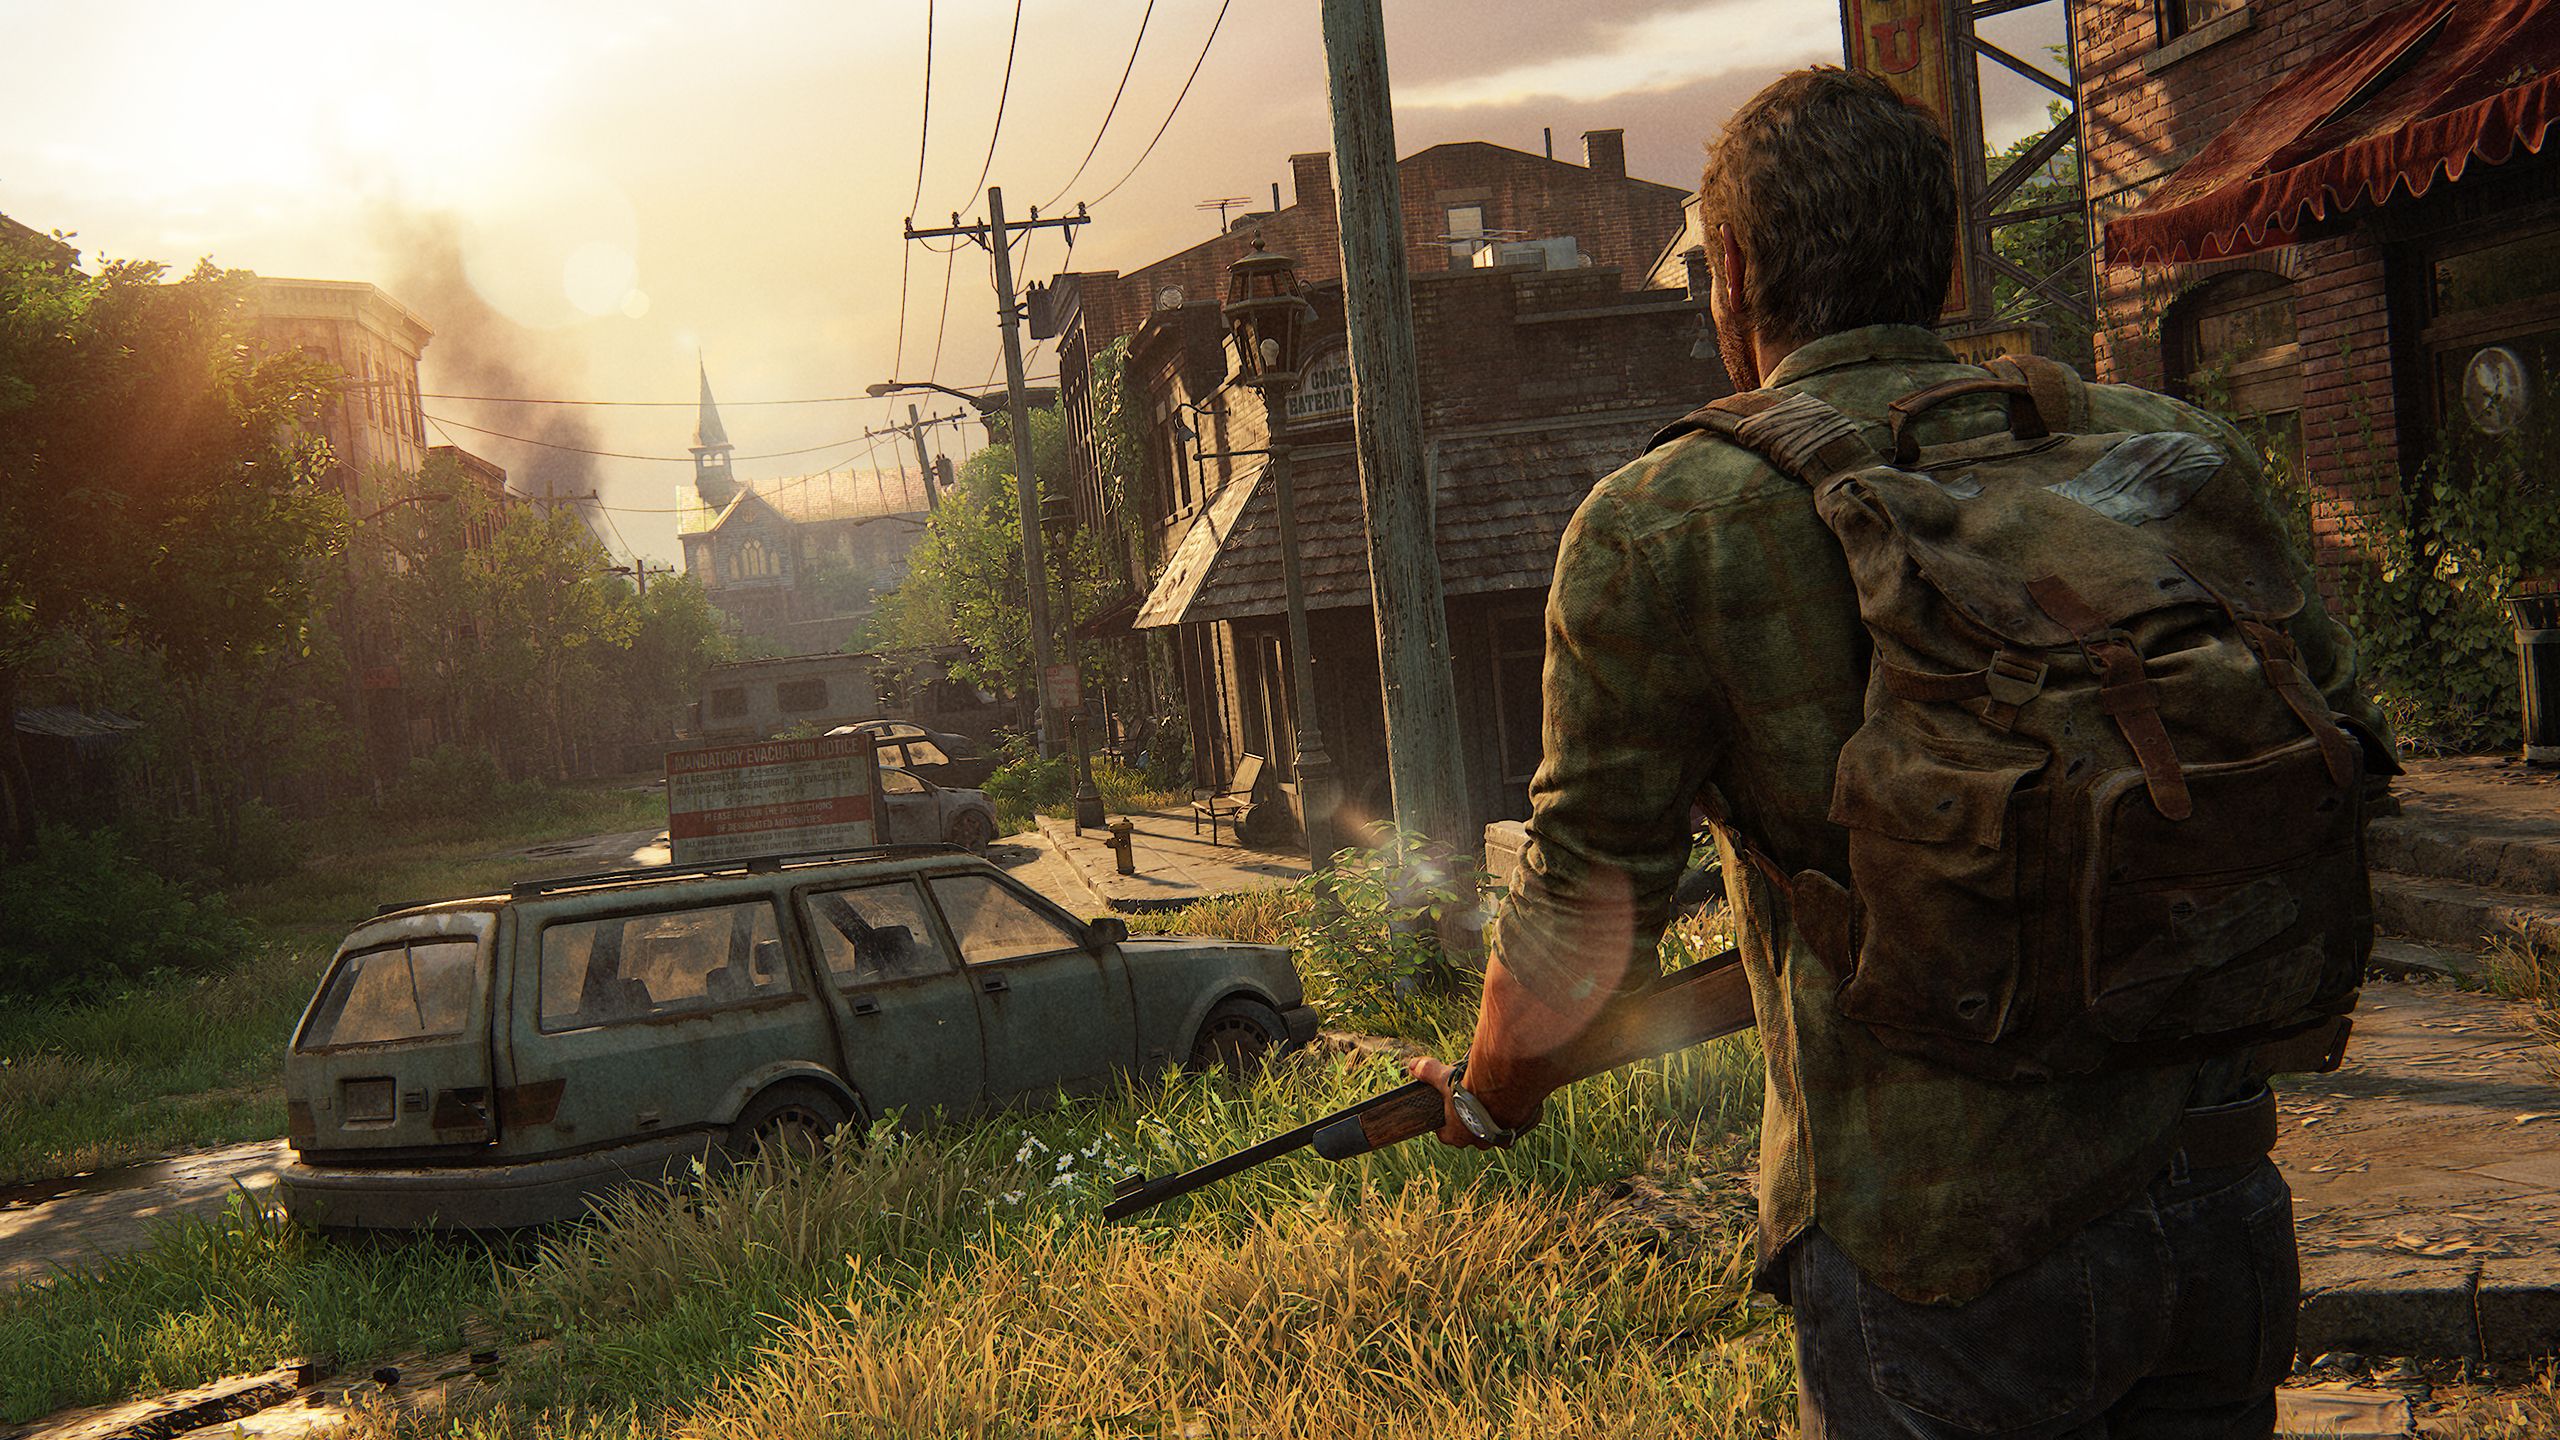 The Last of Us Part 1 PC Review: A Gripping Post-Apocalyptic